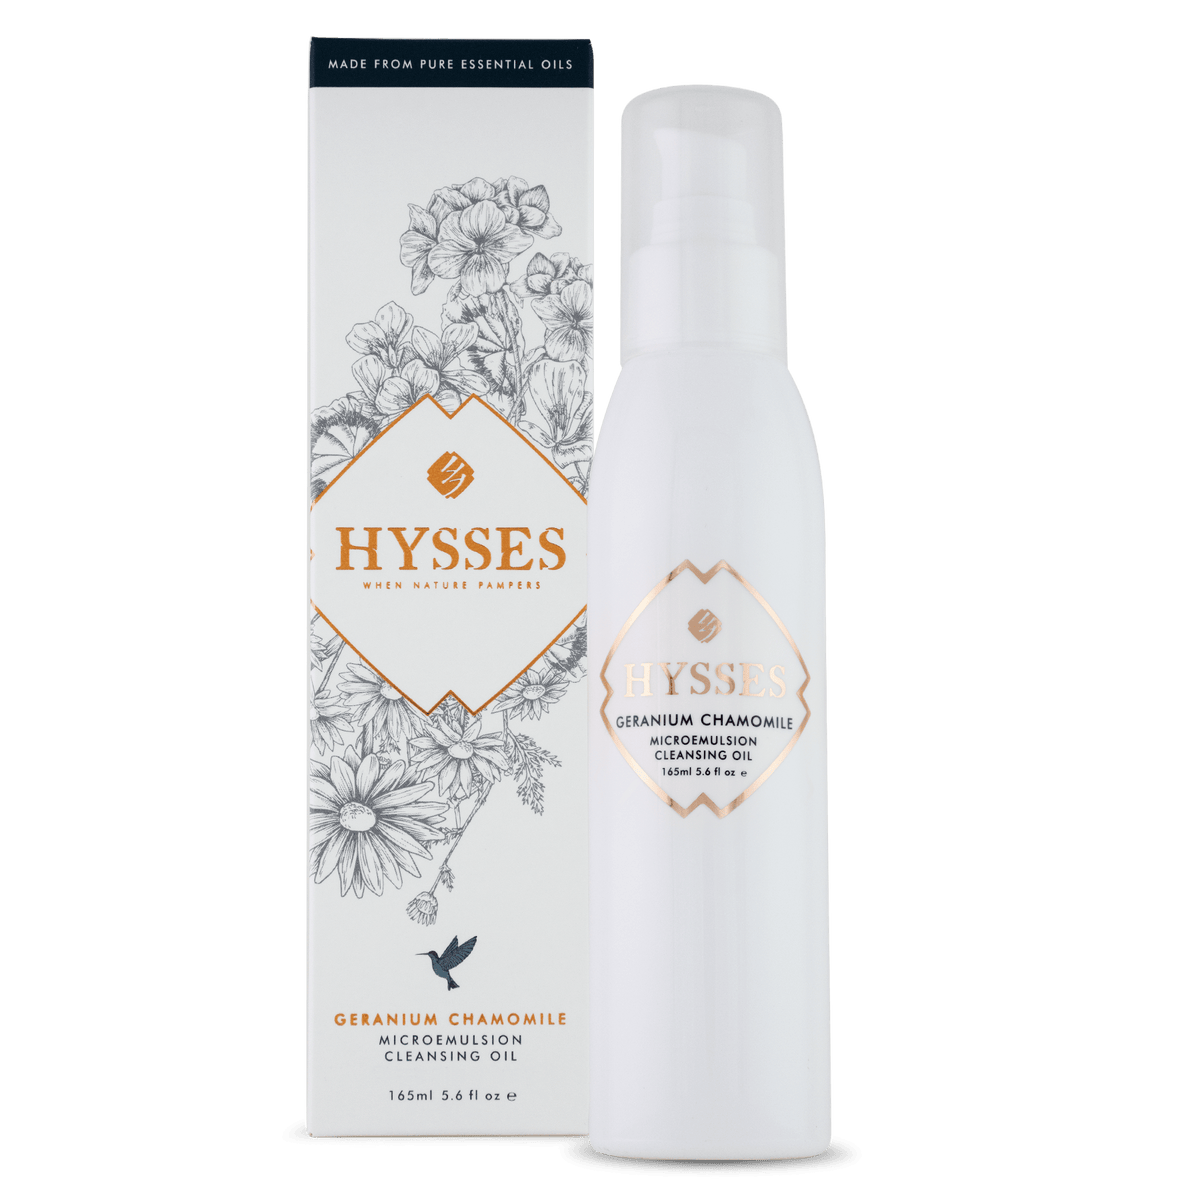 Hysses Face Care FACIAL CLEANSING OIL MICROEMULSION GER. CHAMOMILE, 165ML (25%)